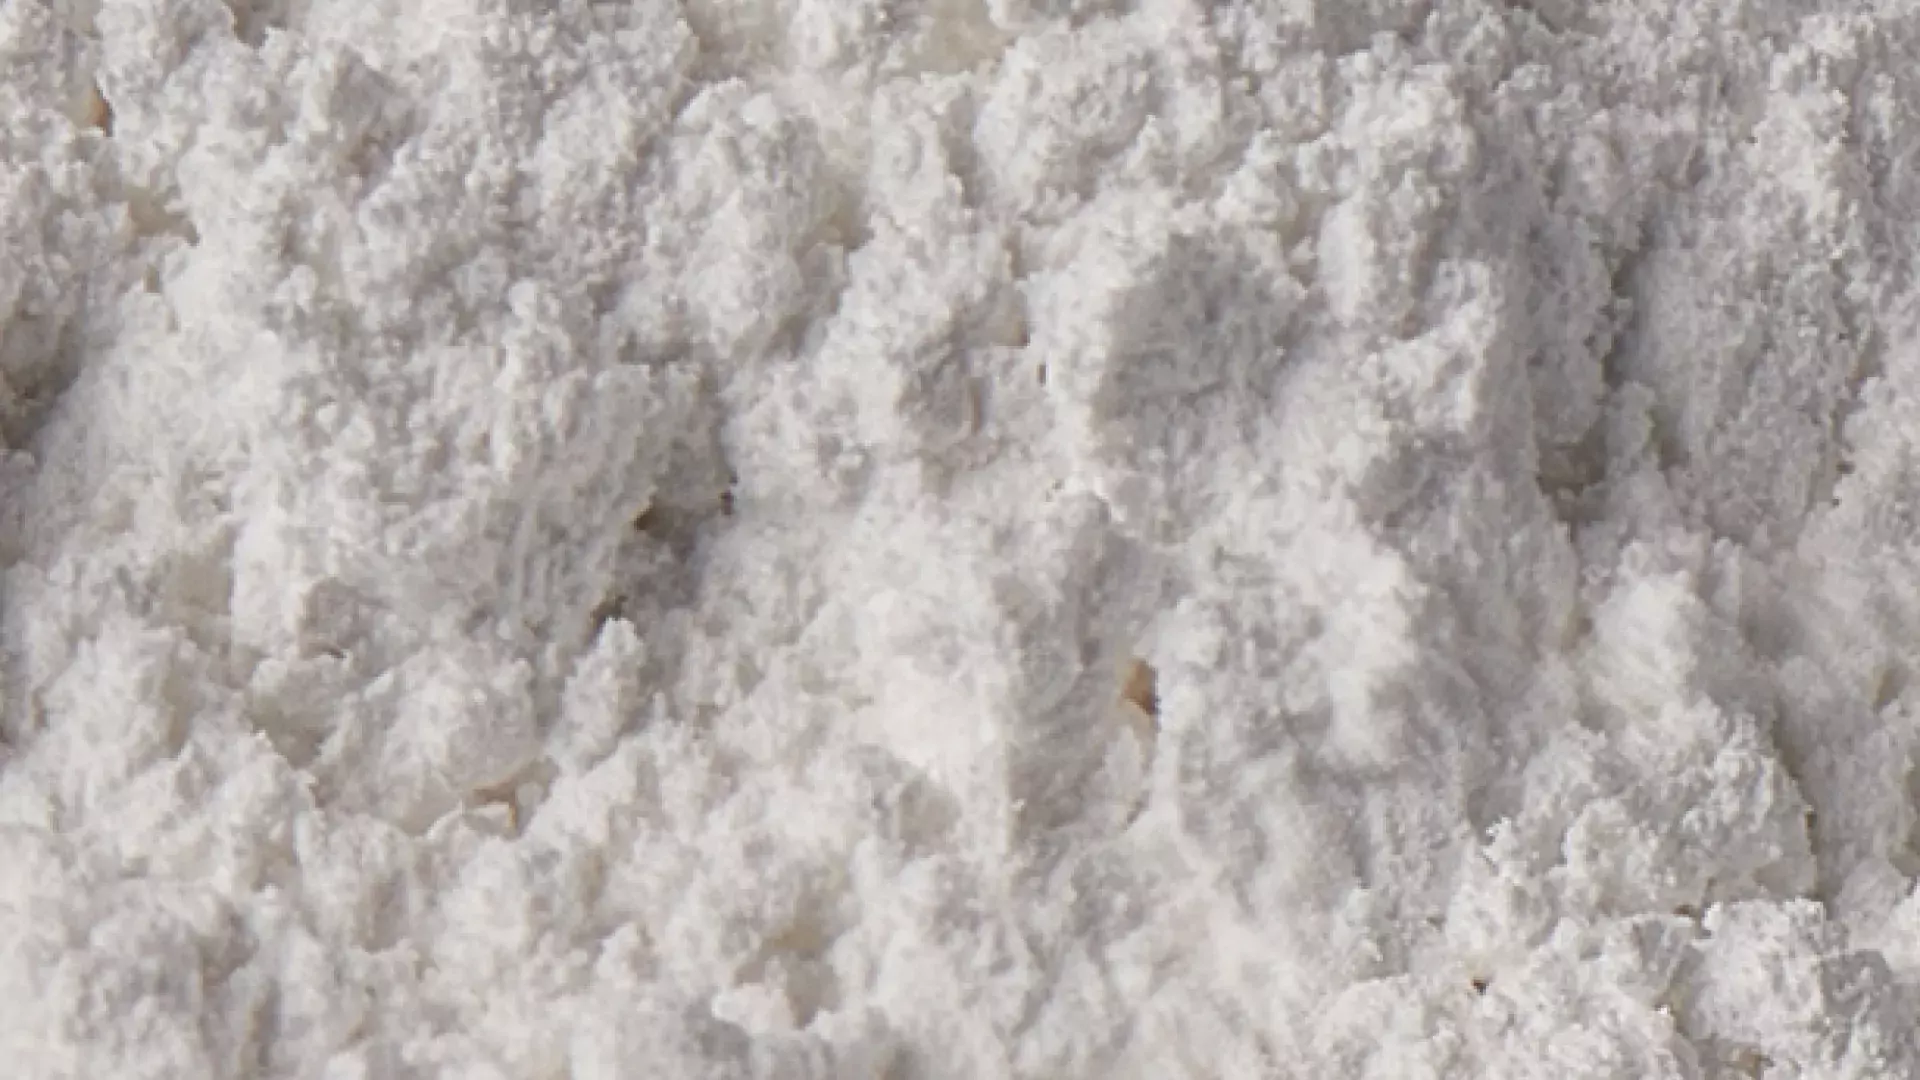 Close-up on hydrated lime powder